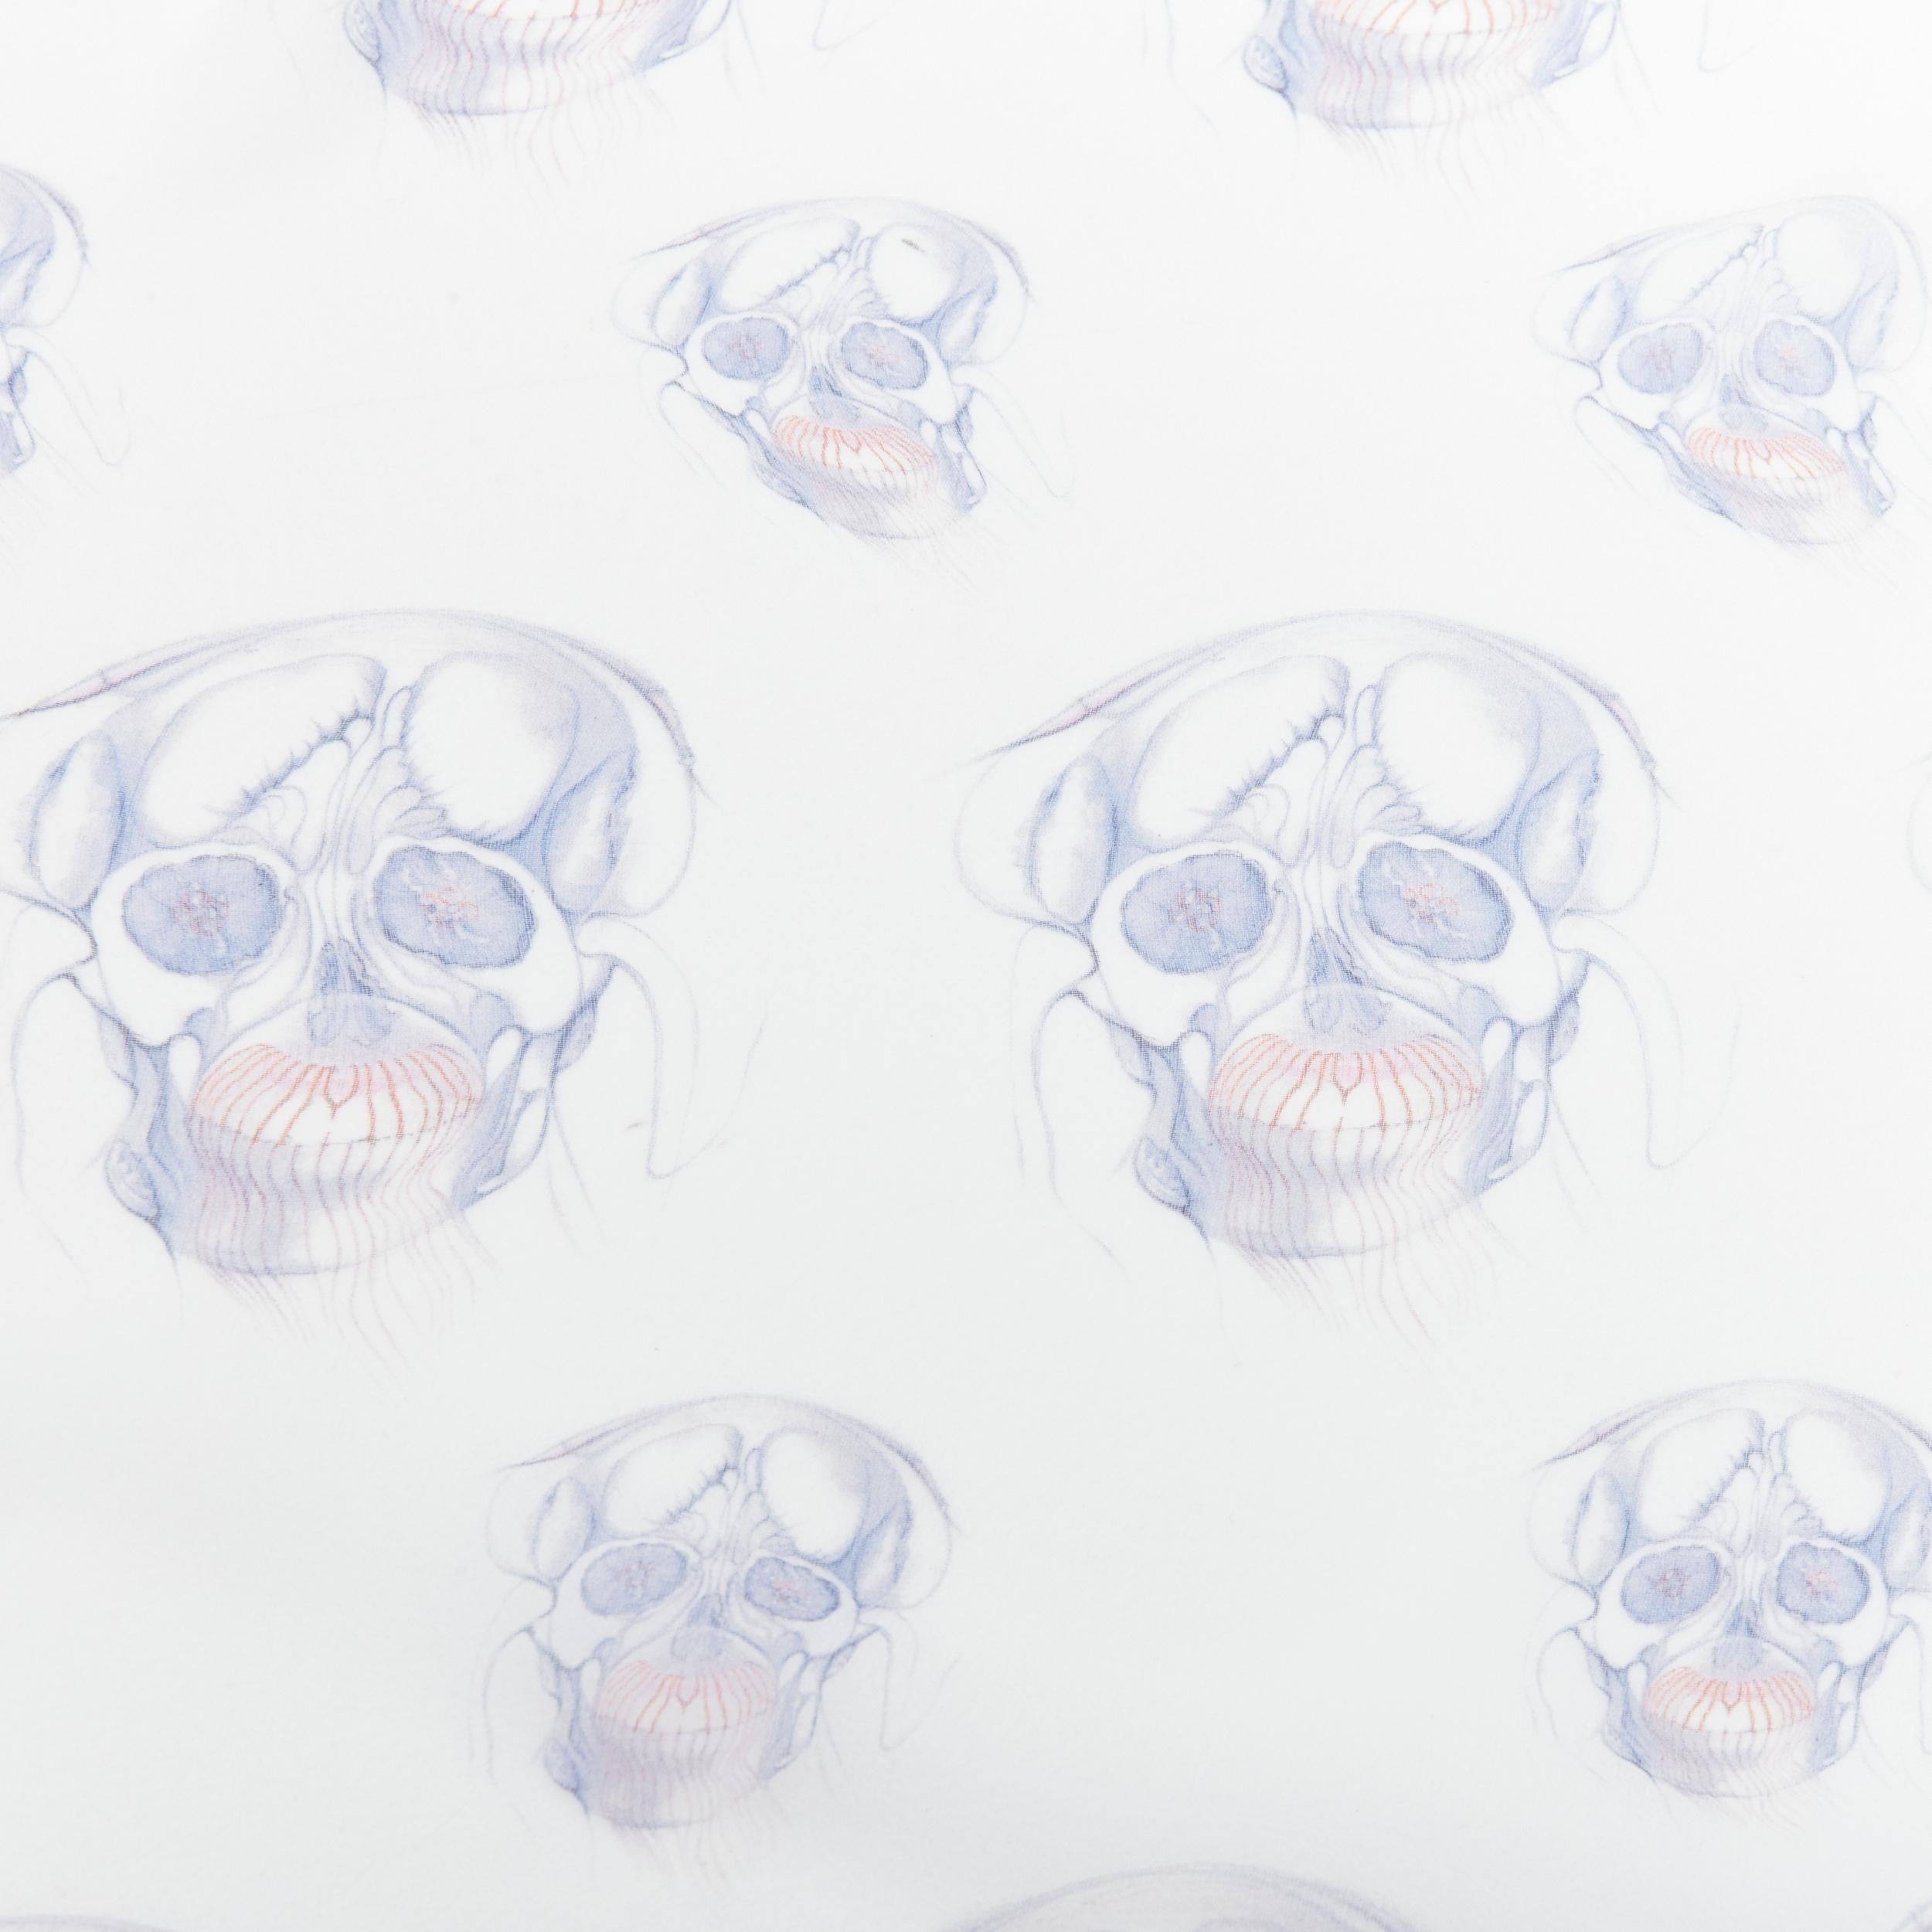 ALEXANDER MCQUEEN 100% silk white blue skull print sheer scarf 
Reference: ANWU/A00573 
Brand: Alexander McQueen 
Material: Silk 
Color: White 
Pattern: Skull 
Made in: Italy 

CONDITION: 
Condition: Good, this item was pre-owned and is in good